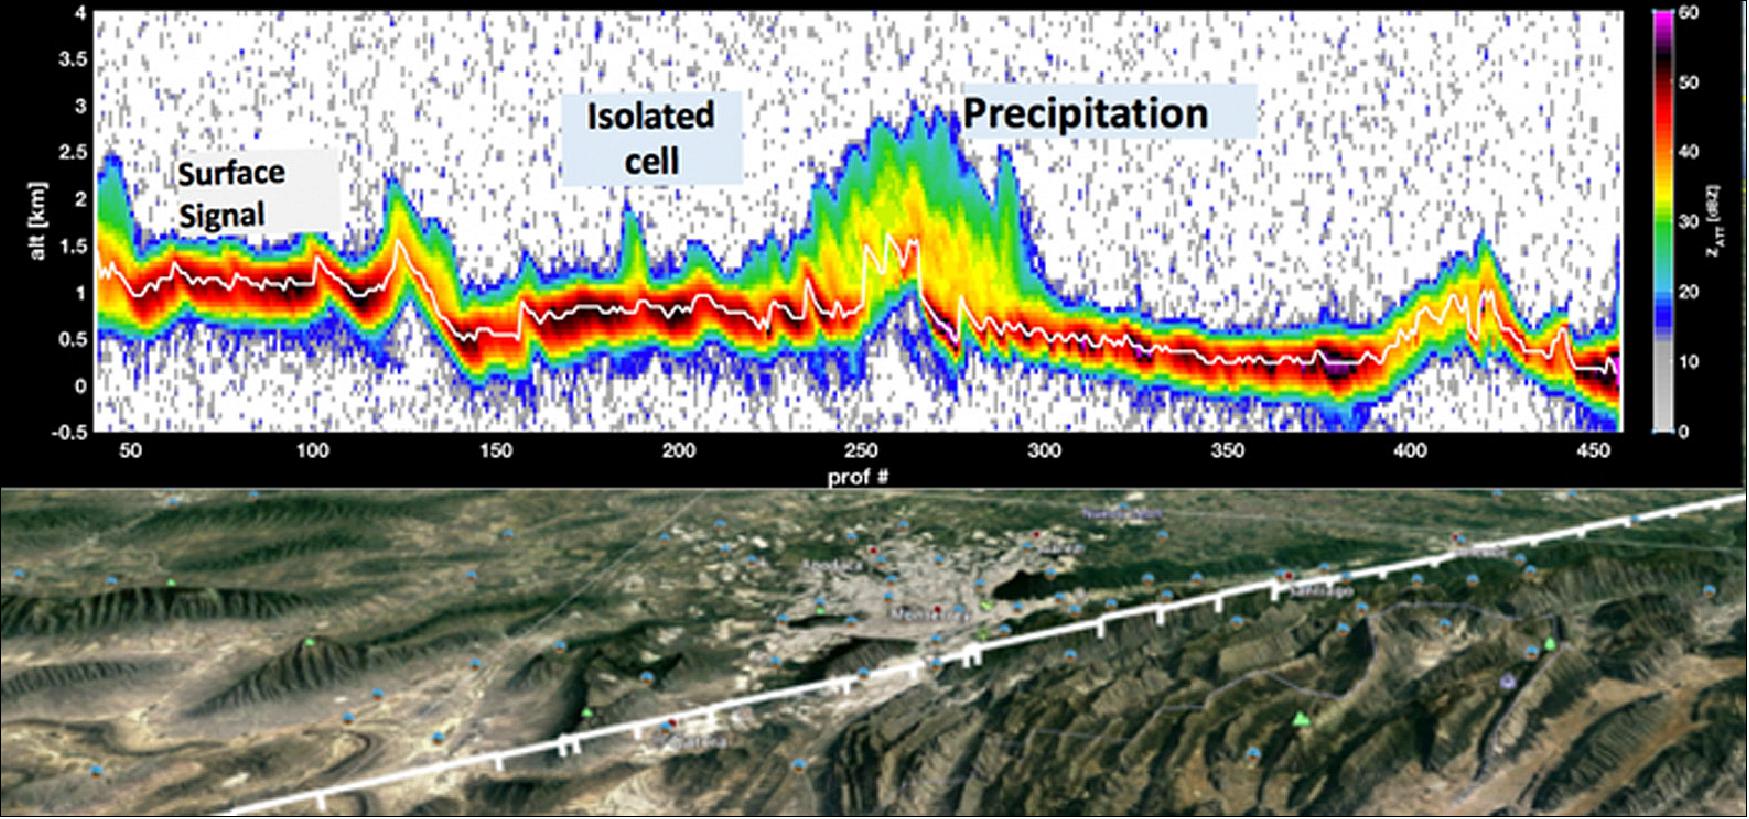 Figure 17: First RainCube radar precipitation measurements on August 27, 2018 over Mexico in fine nadir pointing mode. The radar reflectivity, calibrated to be expressed in dBZ and as a function of radar profile number and altitude, is shown over a Google Maps image of the terrain. (image credit: NASA/JPL/Caltech—Google)